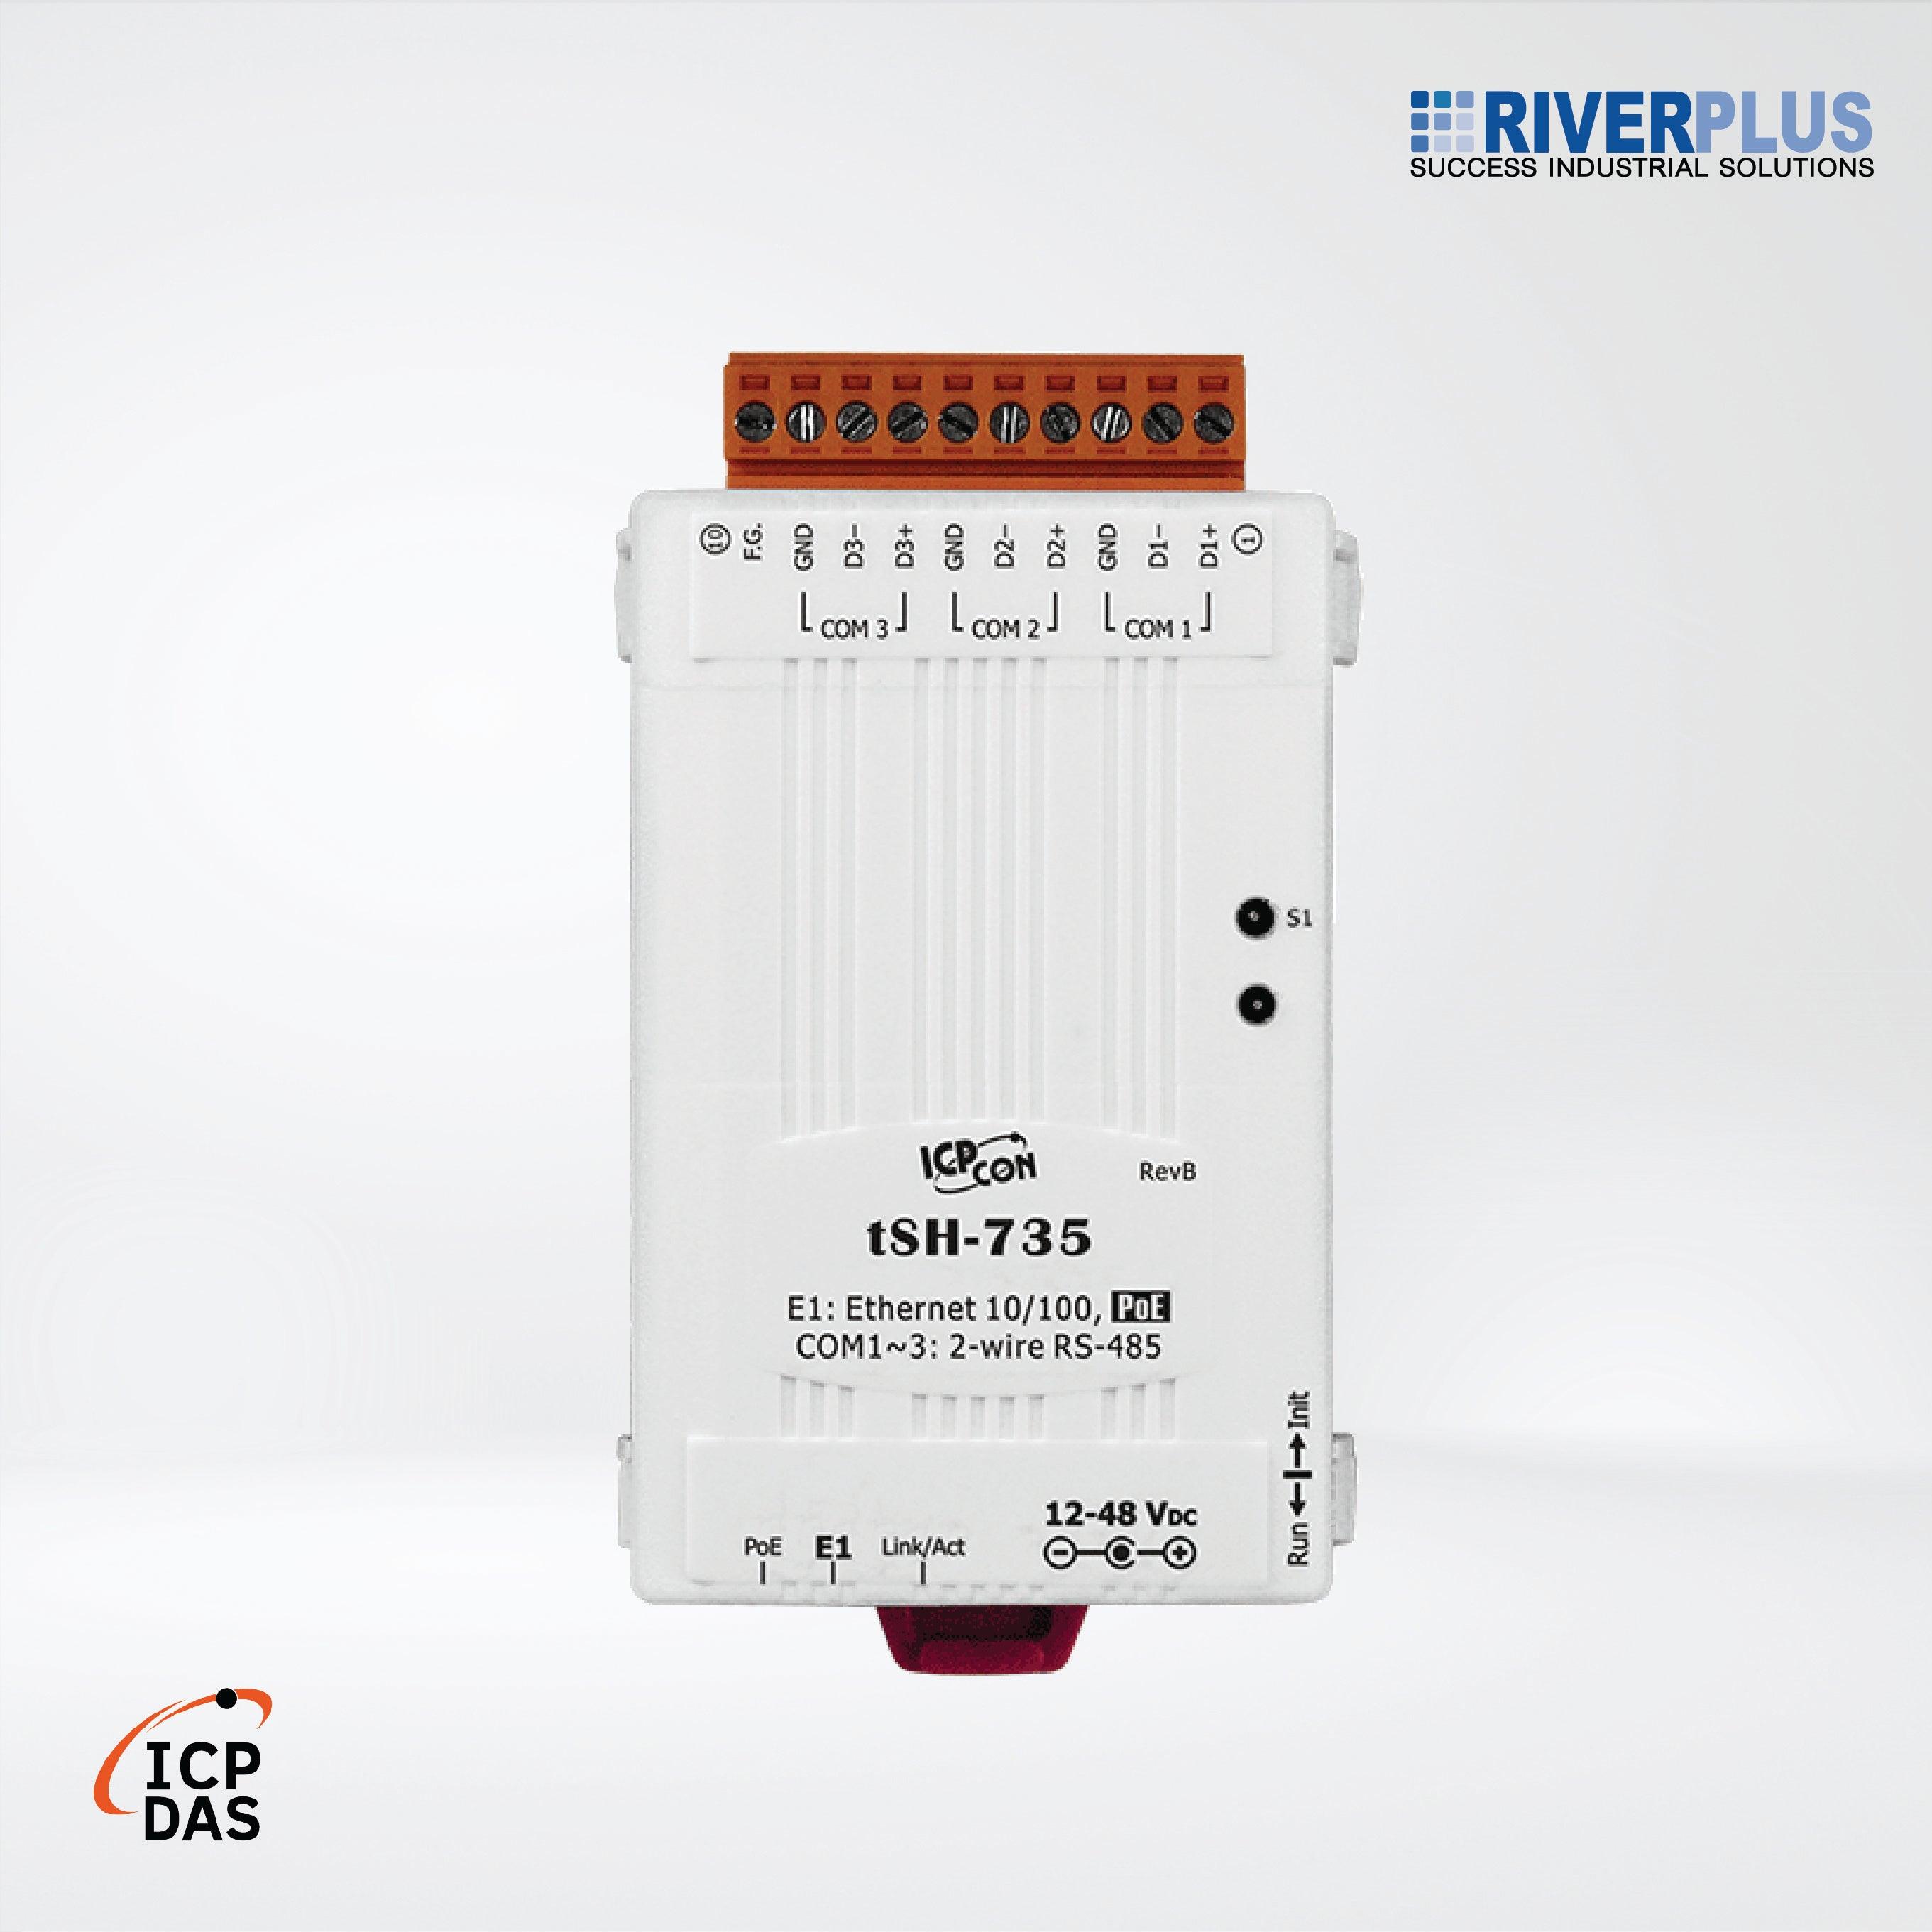 tSH-735 Tiny (3x RS-485) Serial Port Sharer with PoE - Riverplus